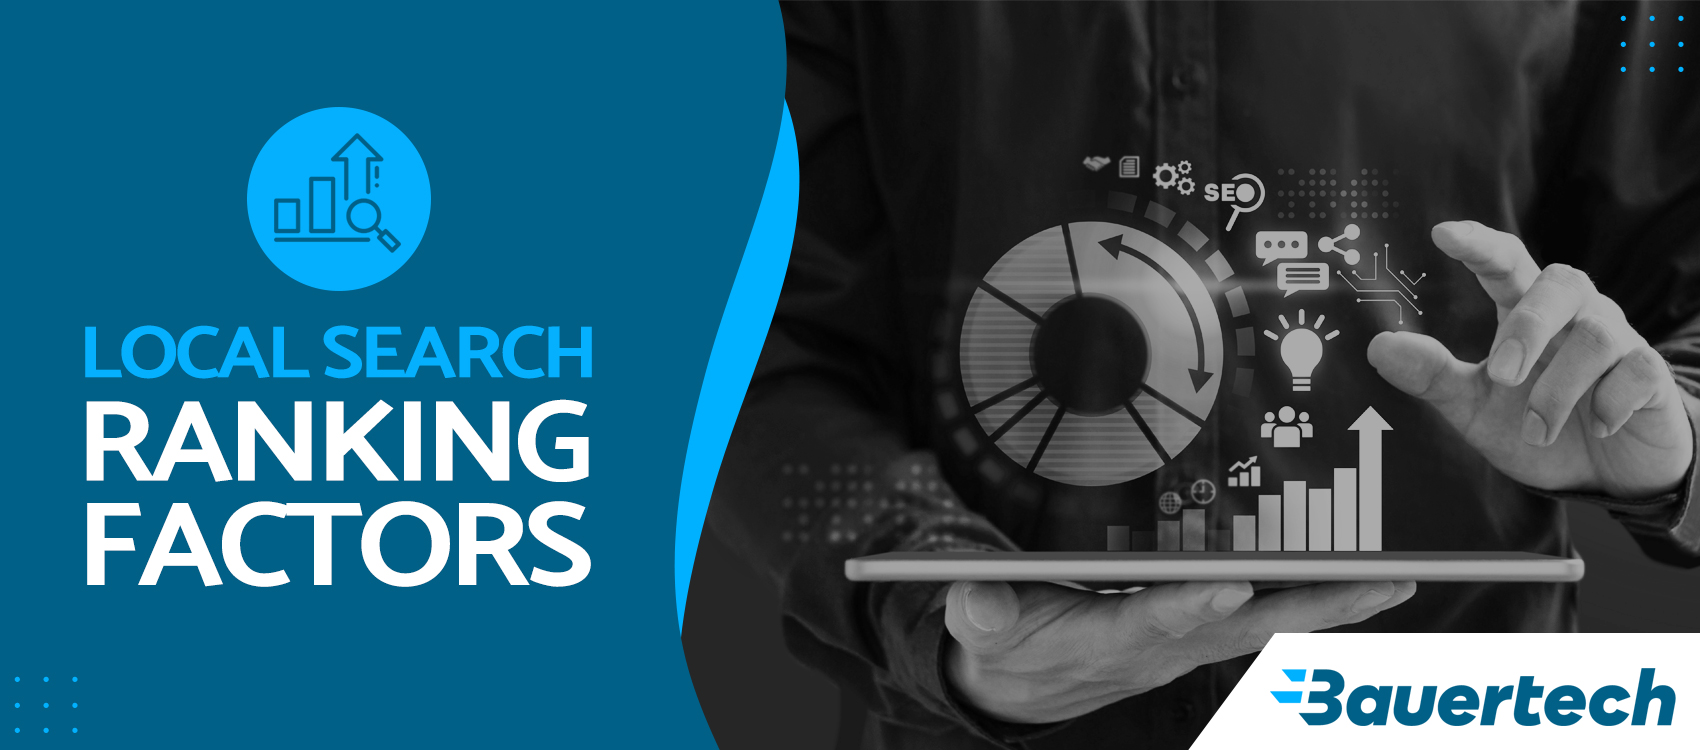 local search ranking factors for small businesses